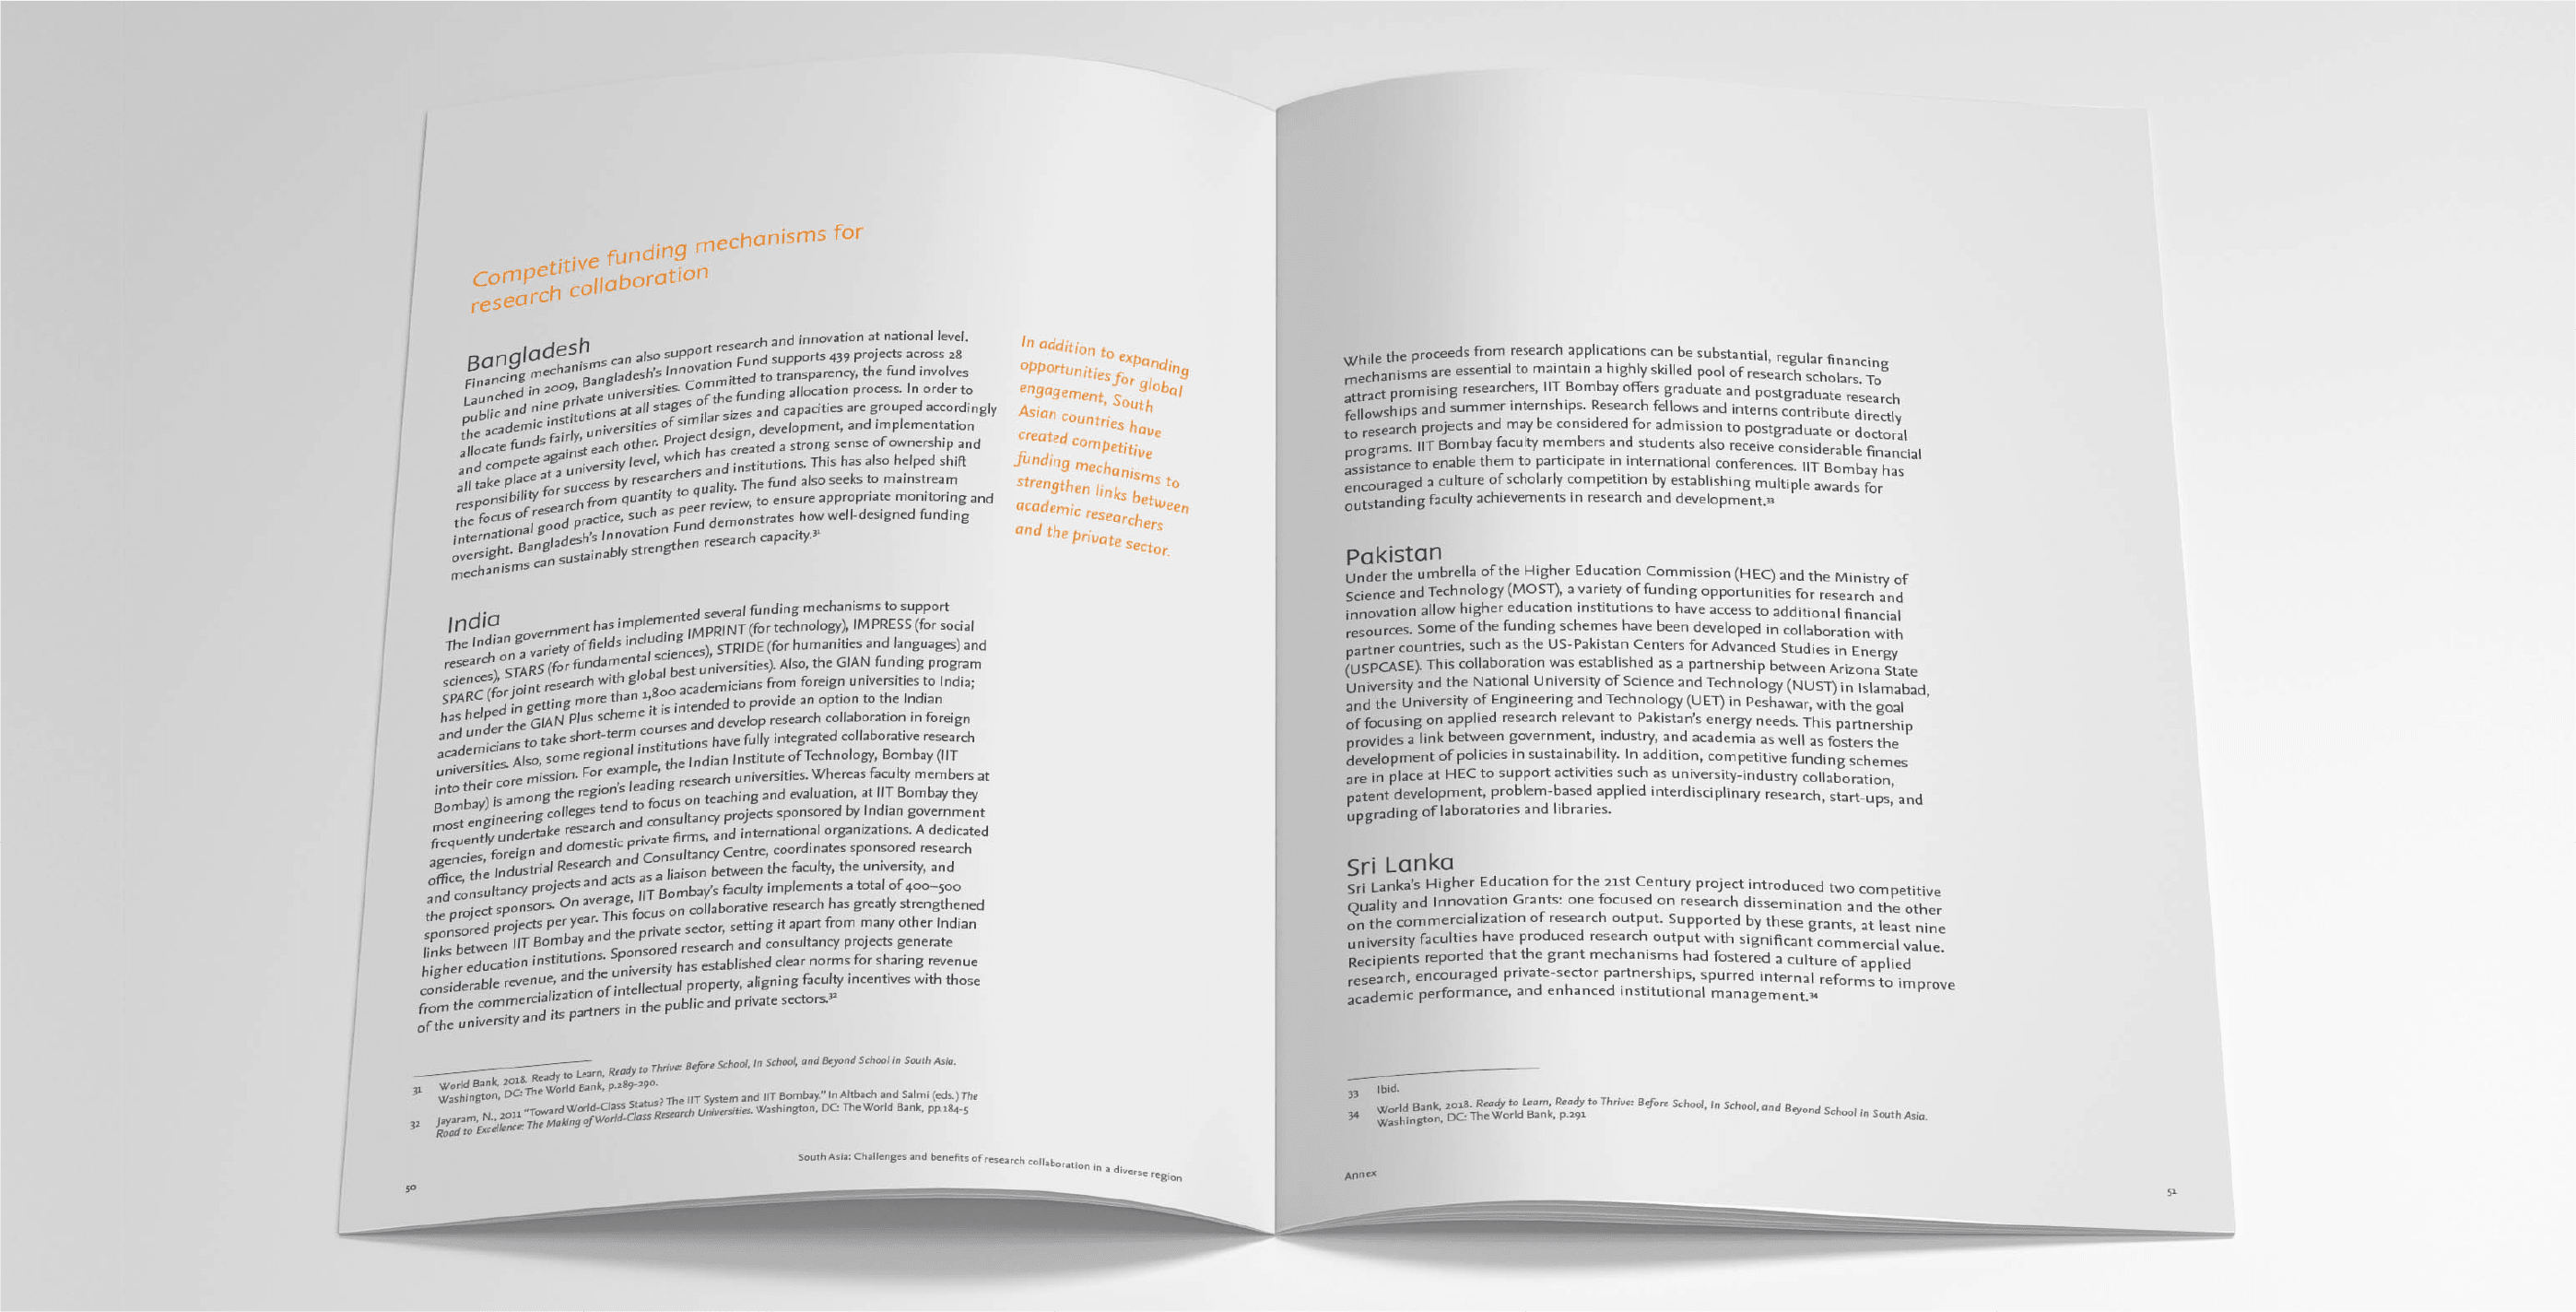 Set of images displaying the design and layout developed for the report.